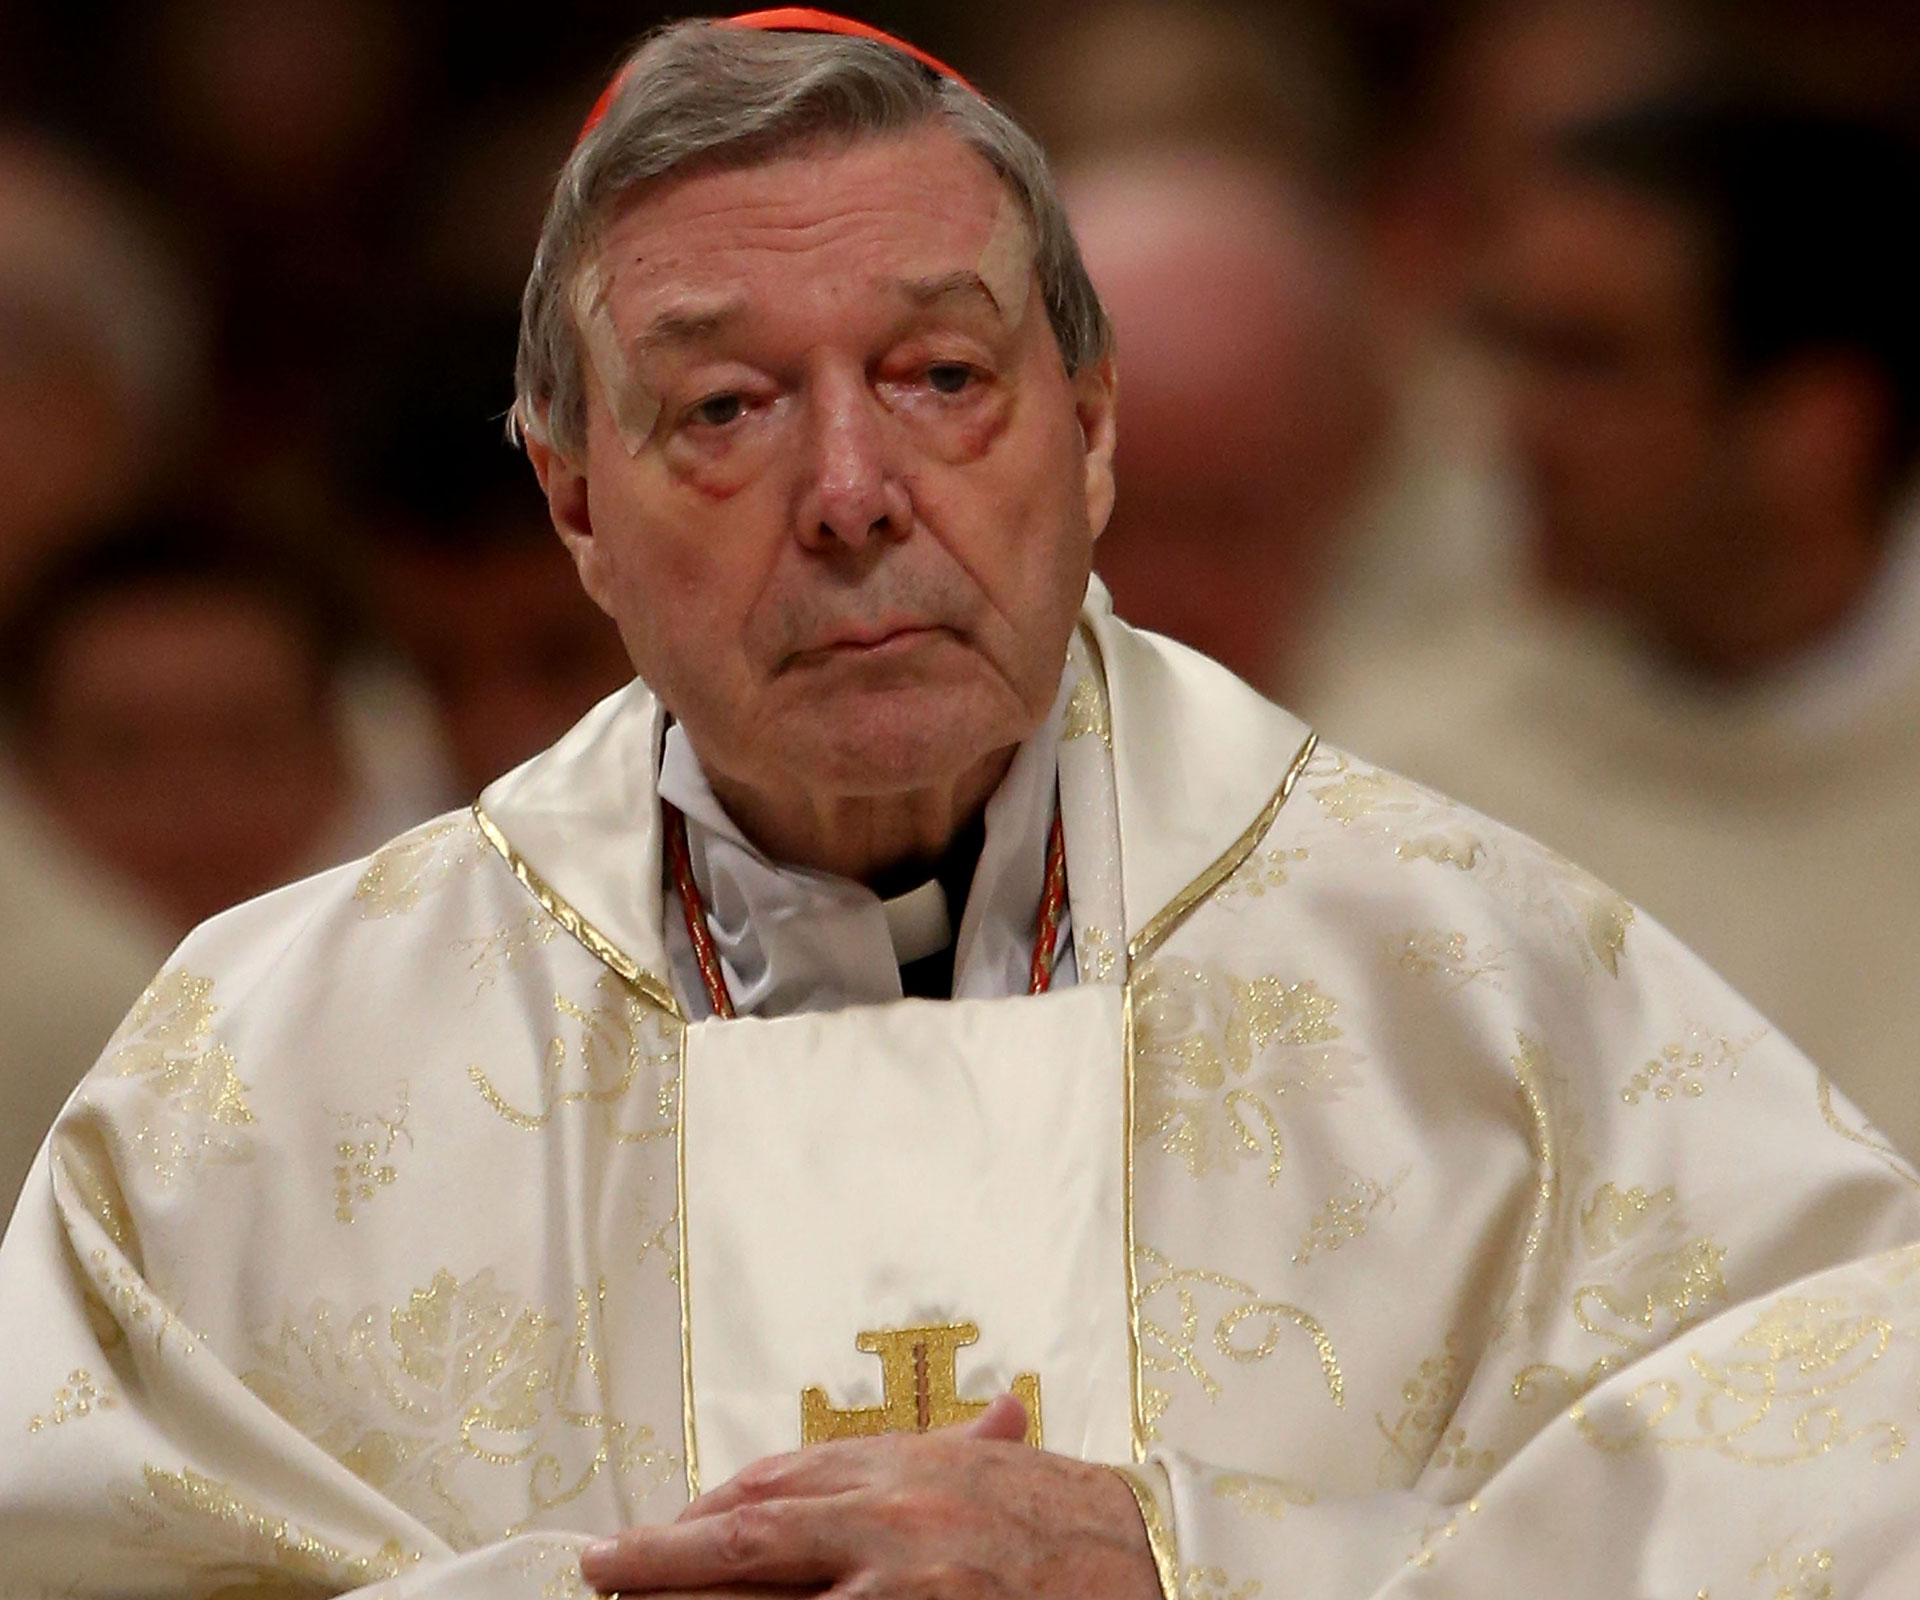 Is George Pell an enemy of the church?